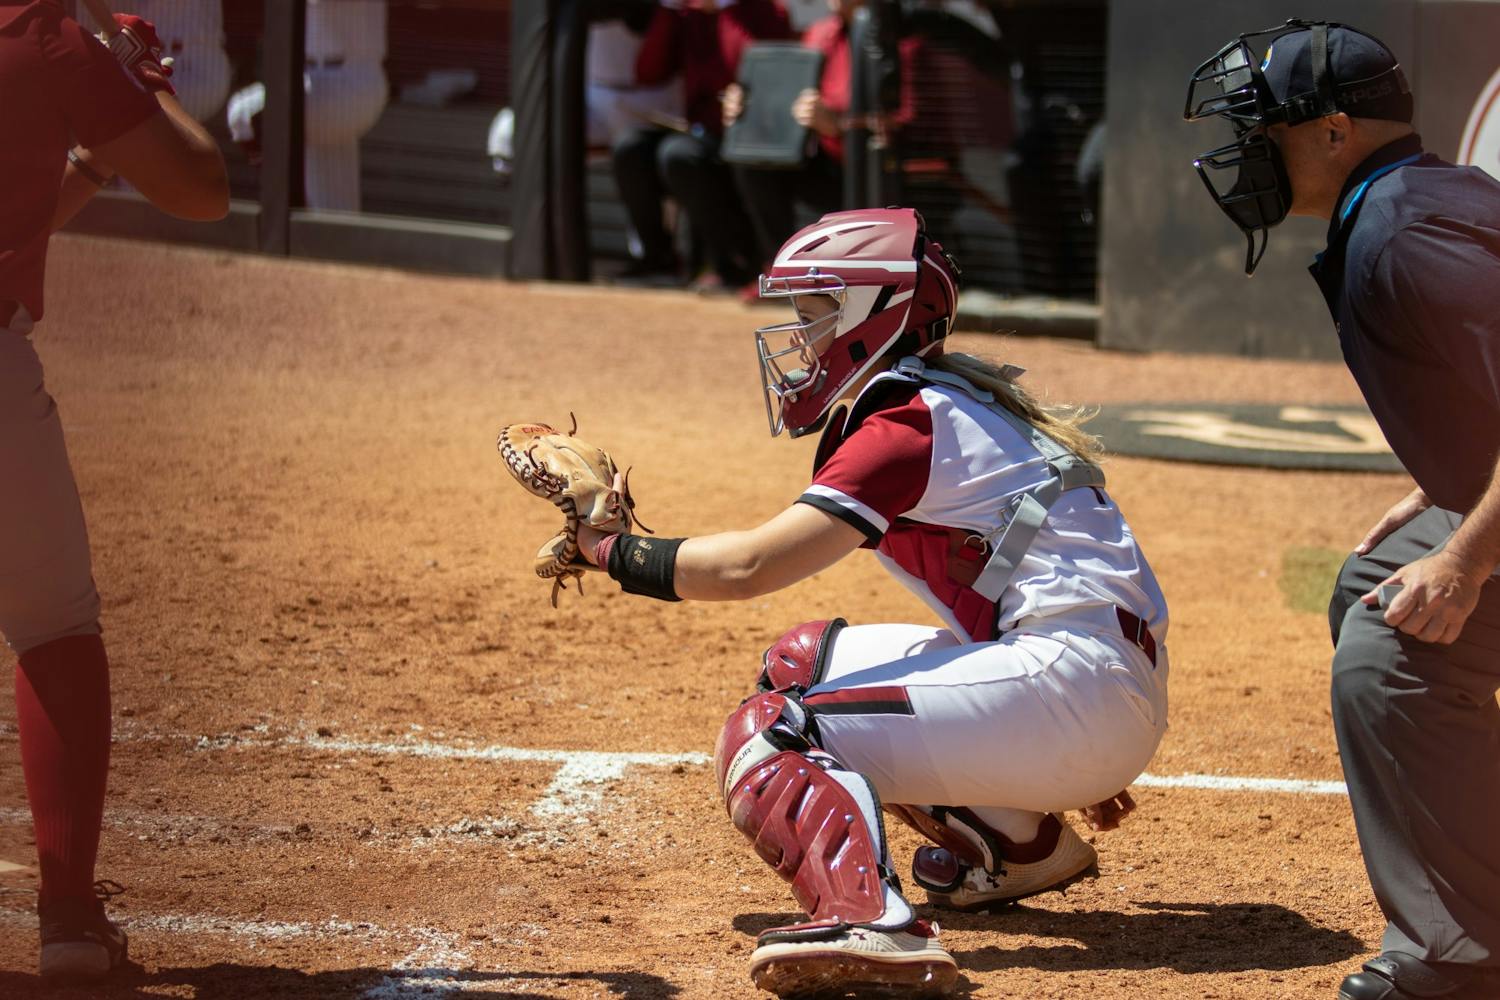 Freshman catcher Giulia Desiderio prepares to catch a pitch at Beckham Field on March 27, 2022. South Carolina lost to Alabama 6-1.